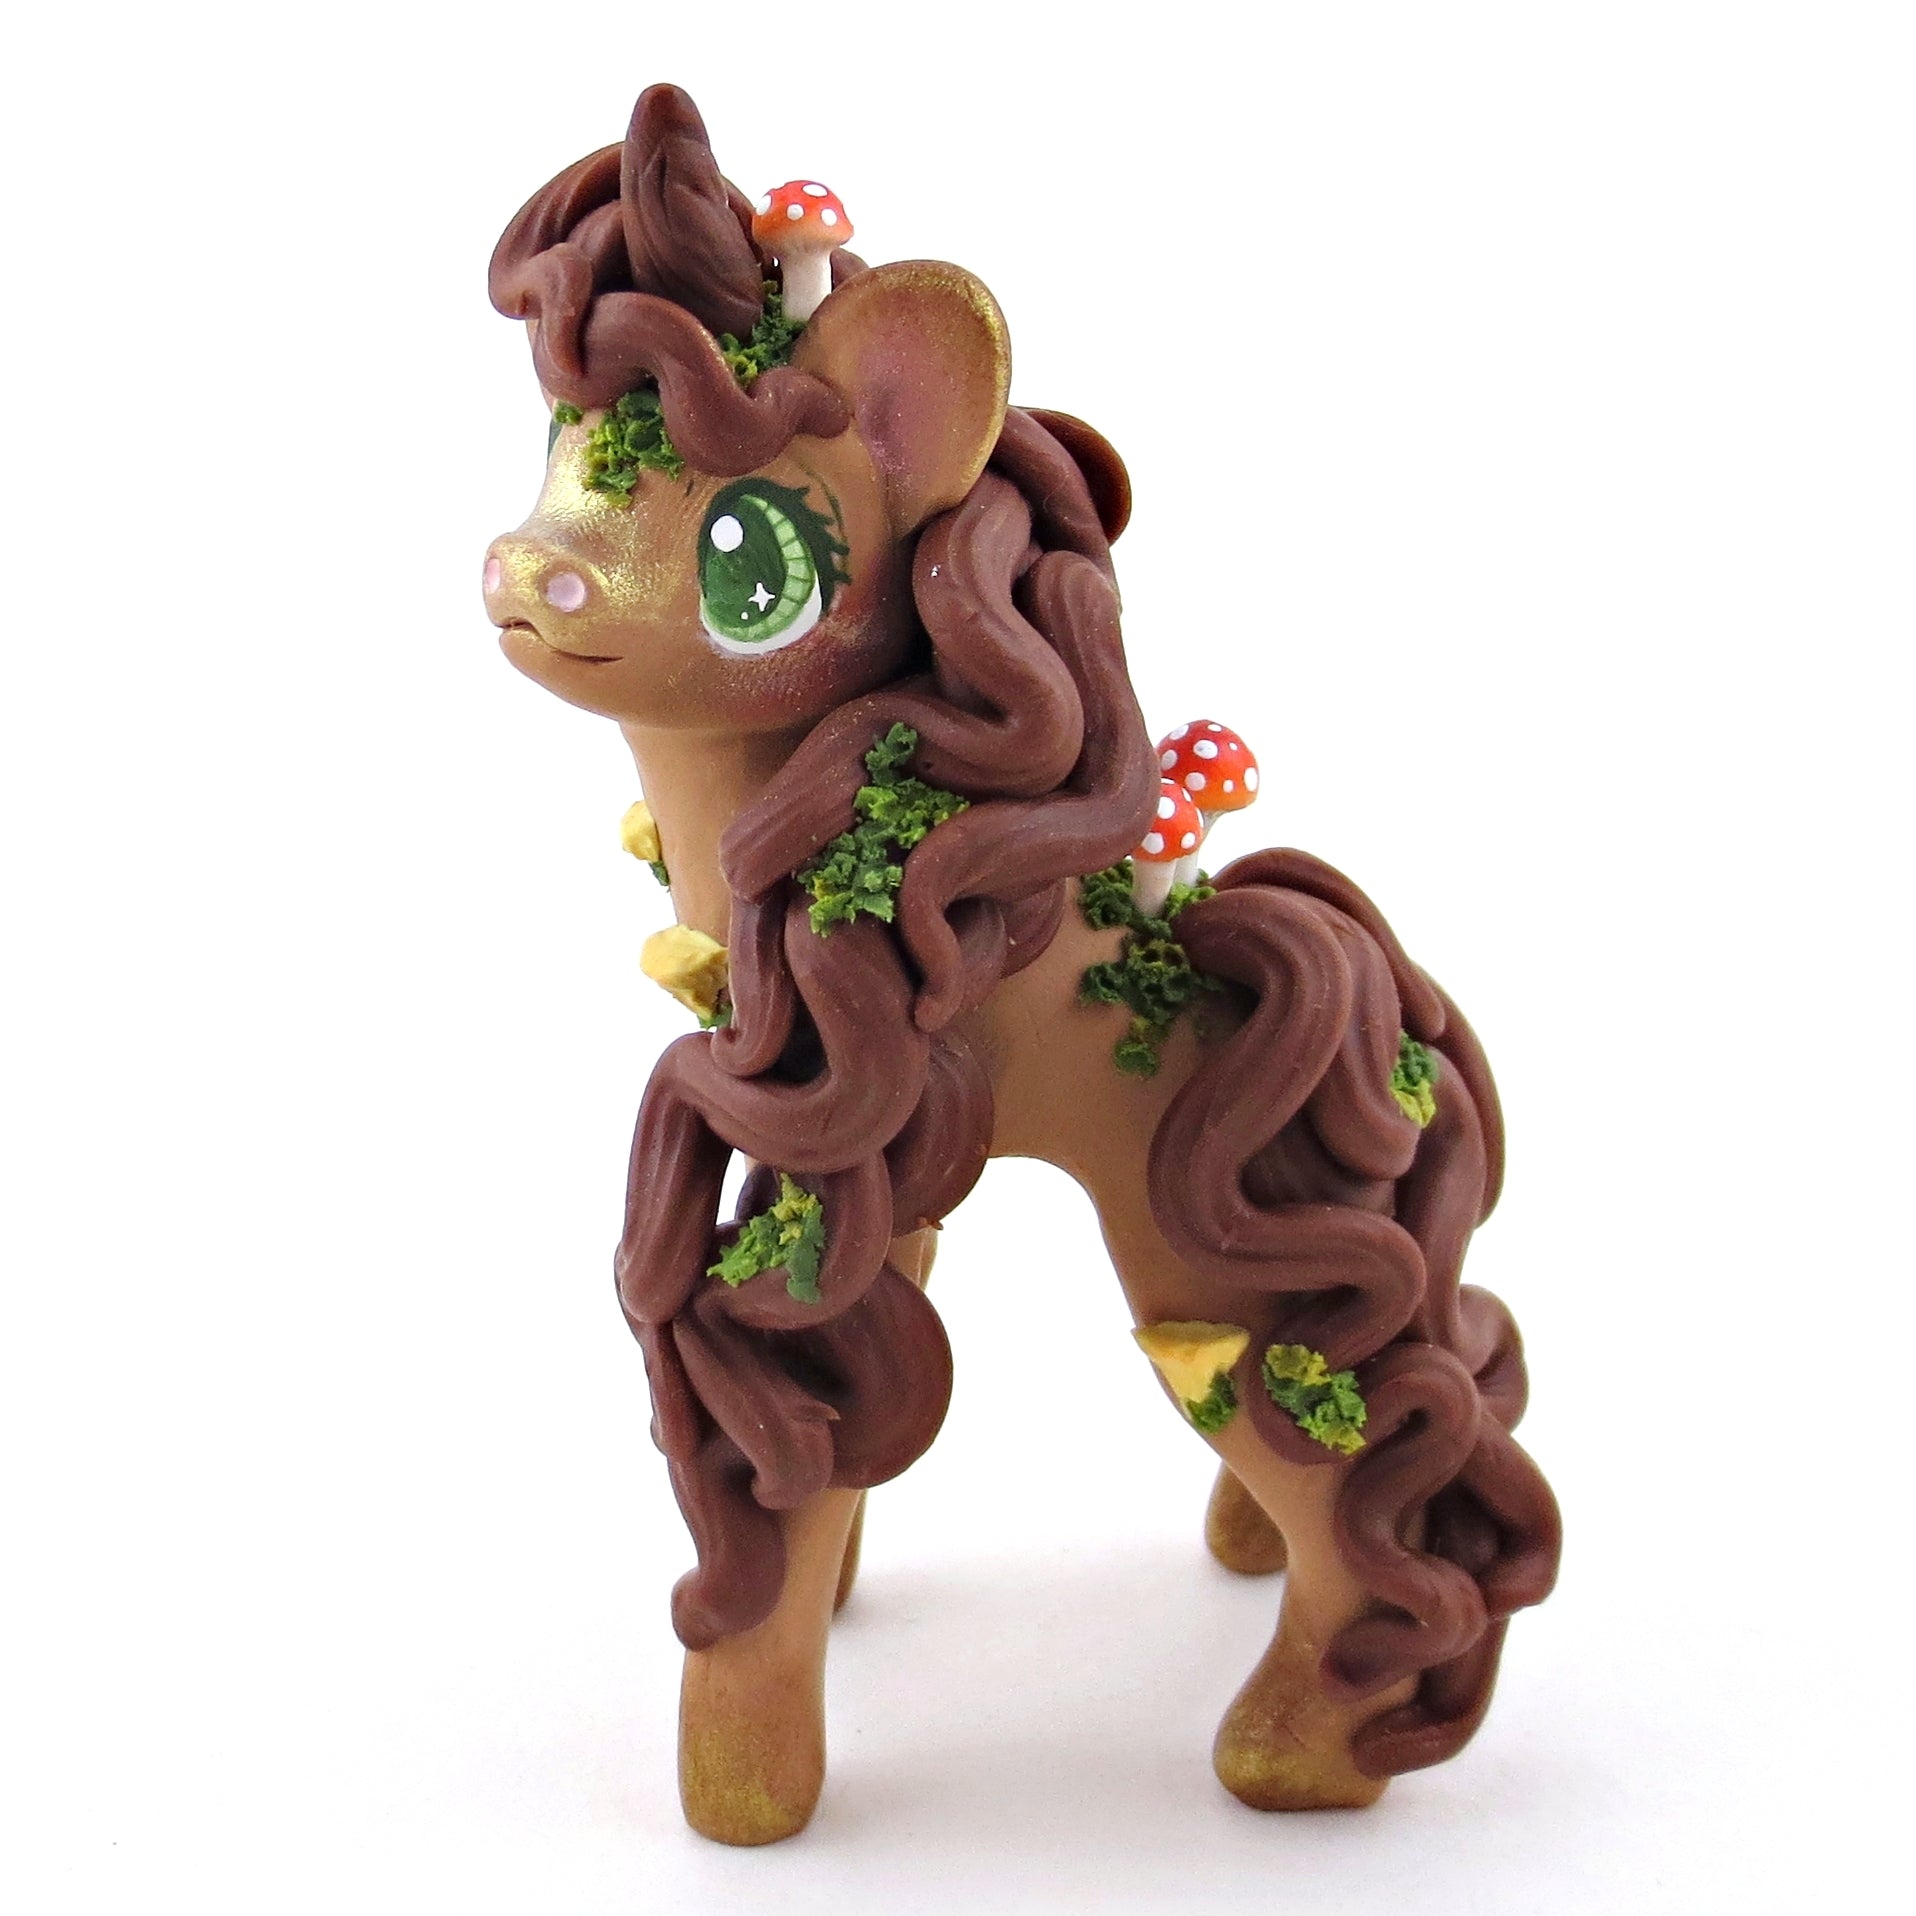 Forest Floor Earth Unicorn Figurine - Polymer Clay Elementals Collection